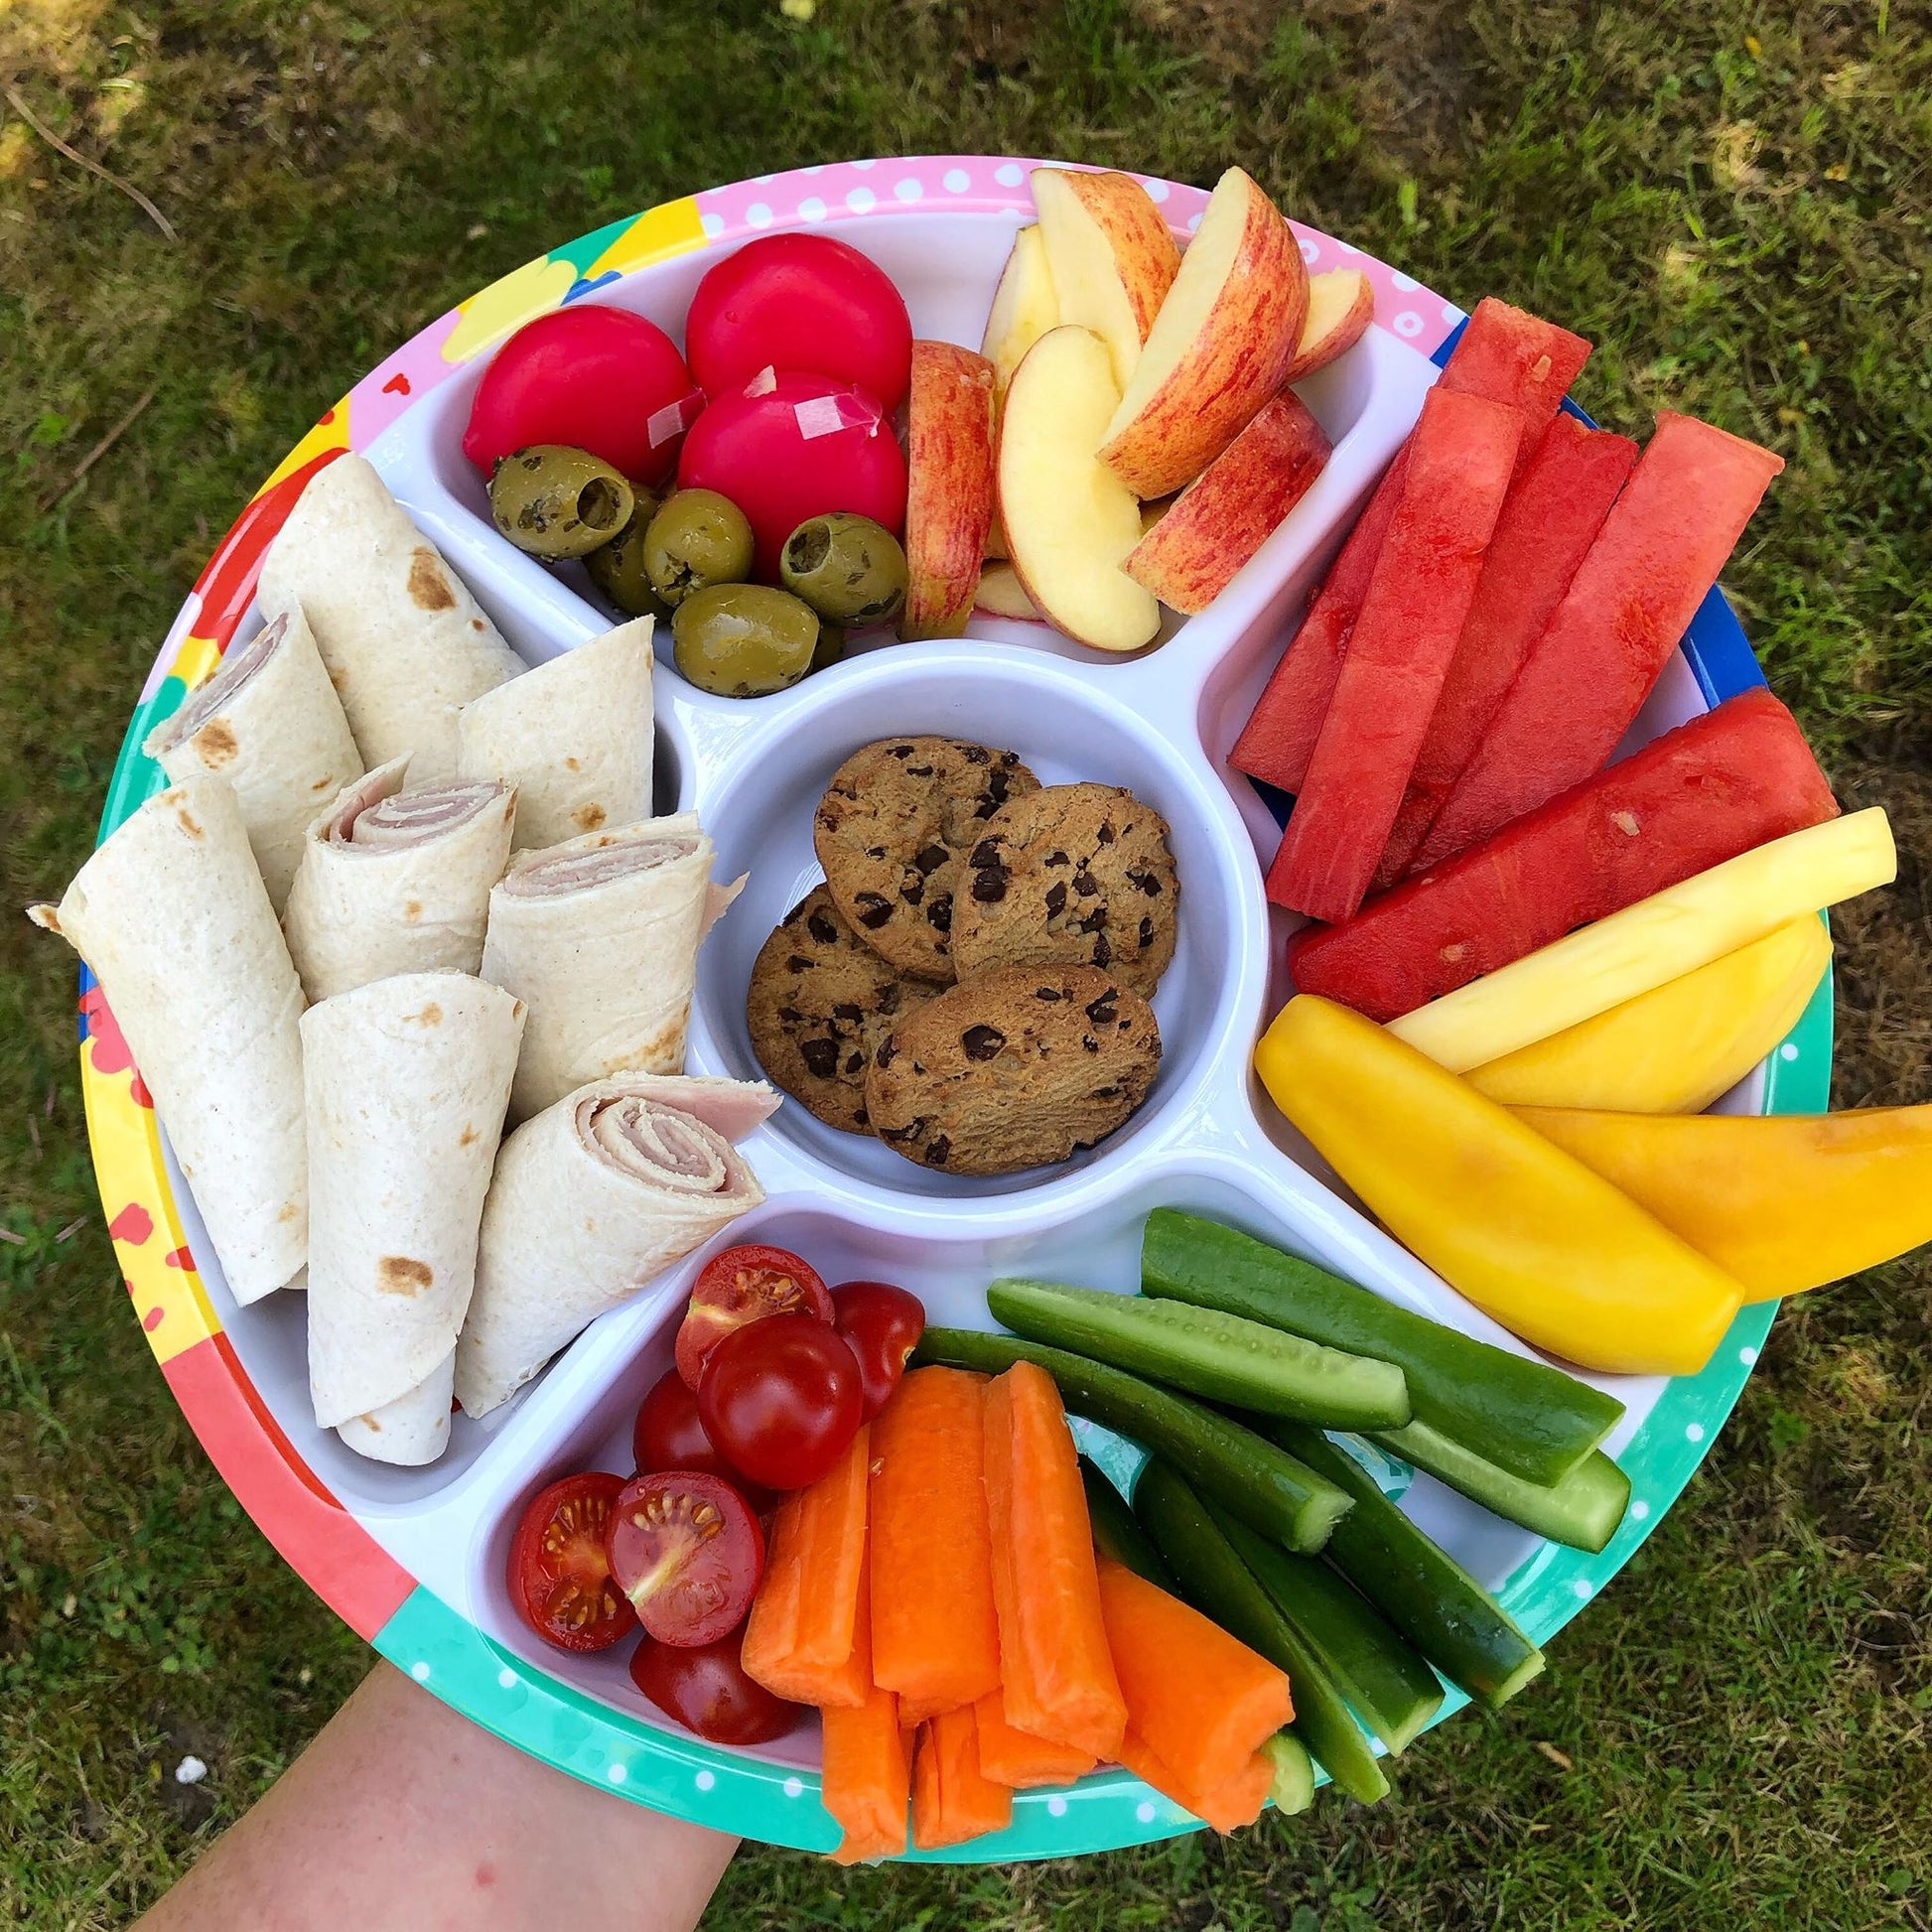 The Biggie Divided Plate For Kids filled with a variety of snacks, wraps and fresh fruit and veggies.